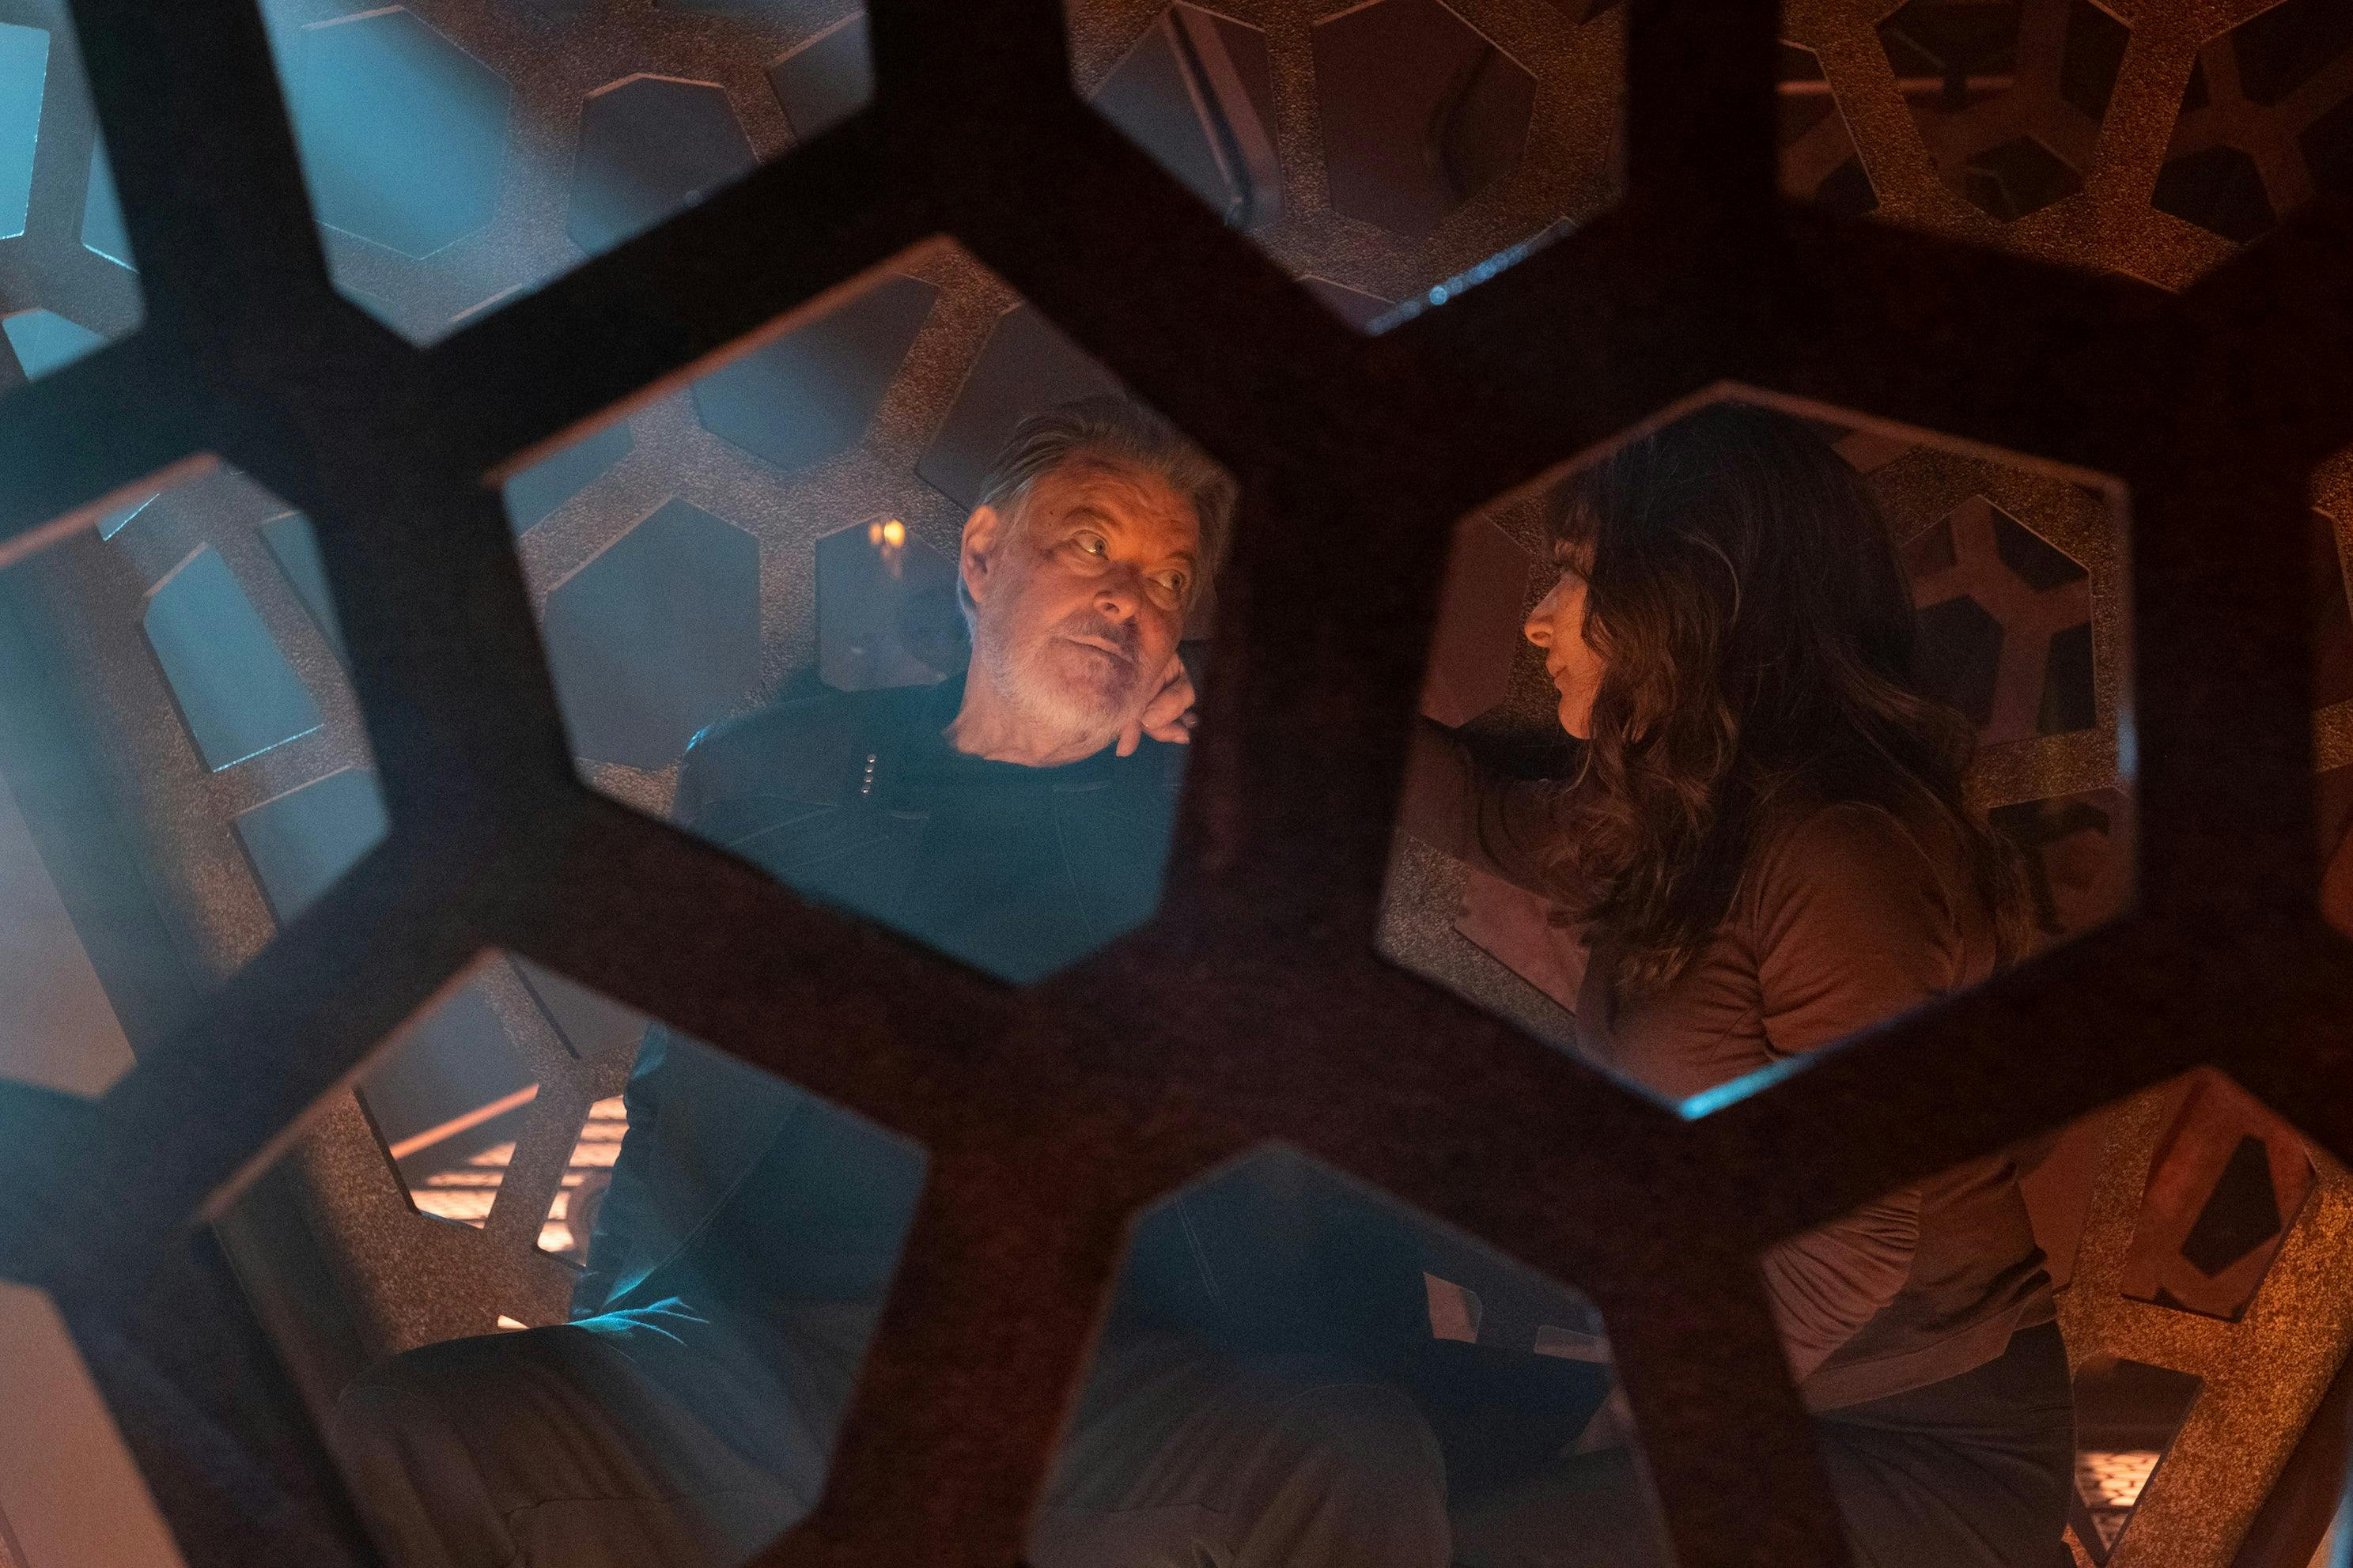 A still of Will Riker and Deanna Troi in a Shrike cell sitting side-by-side looking over at each other as Deanna places her hand on Will's cheek